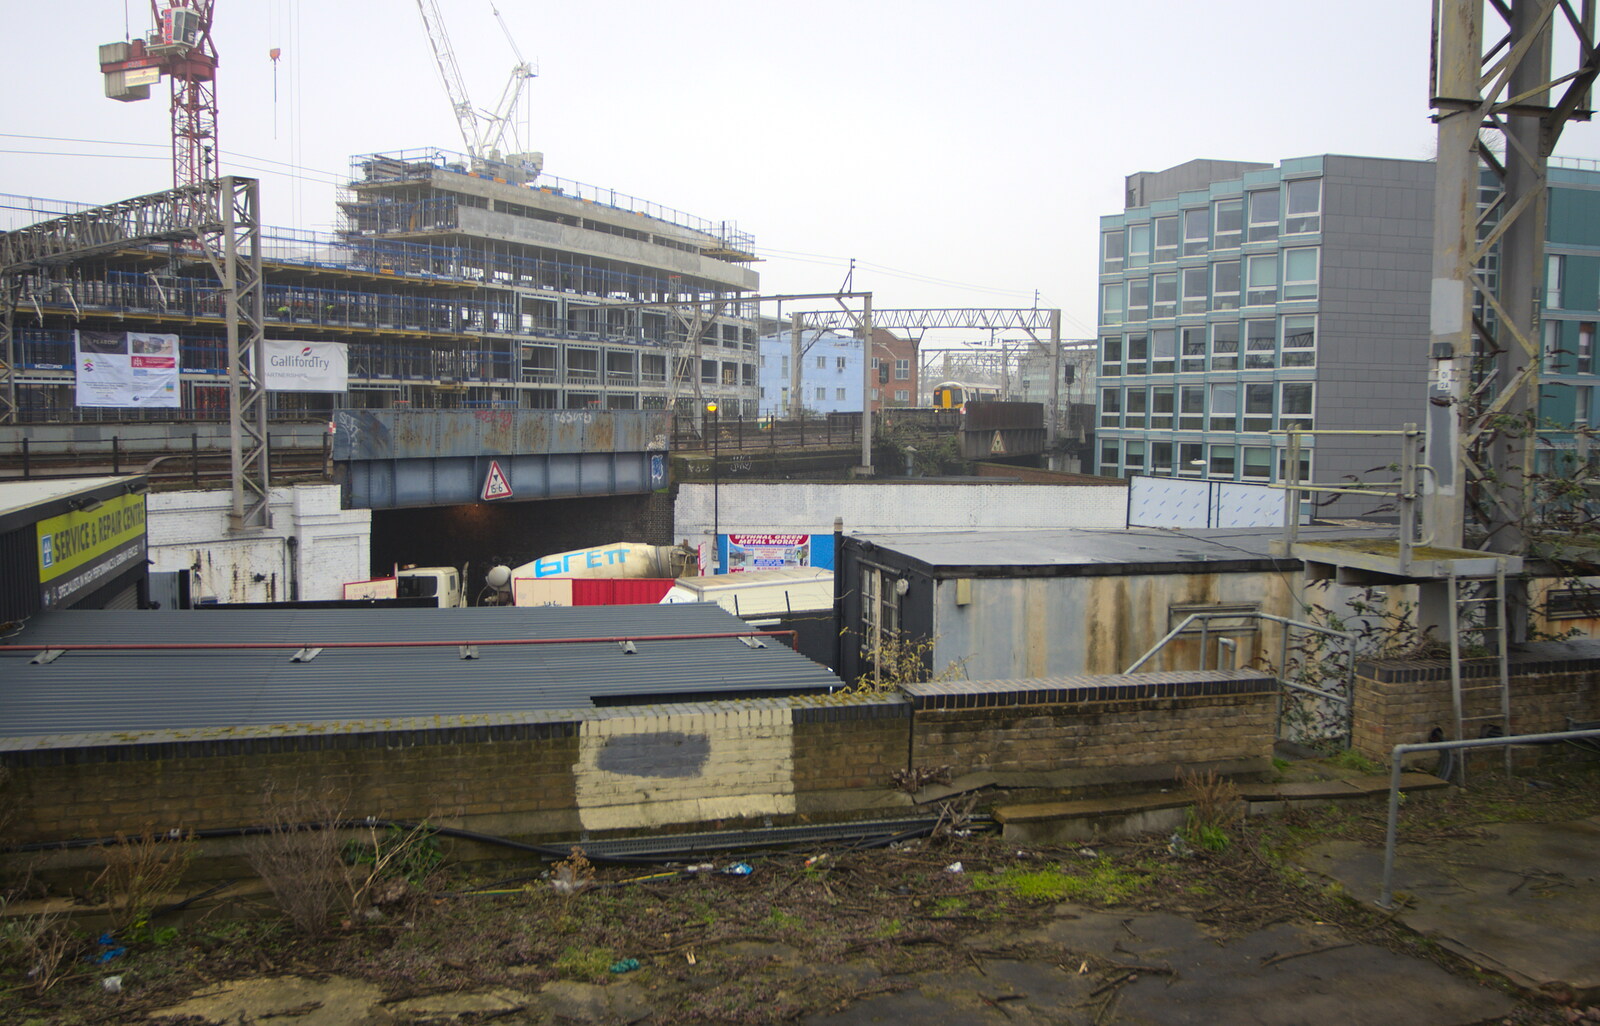 A view over Bethnal Green from The Demolition of the Bacon Factory, Ipswich, Suffolk - 20th February 2013